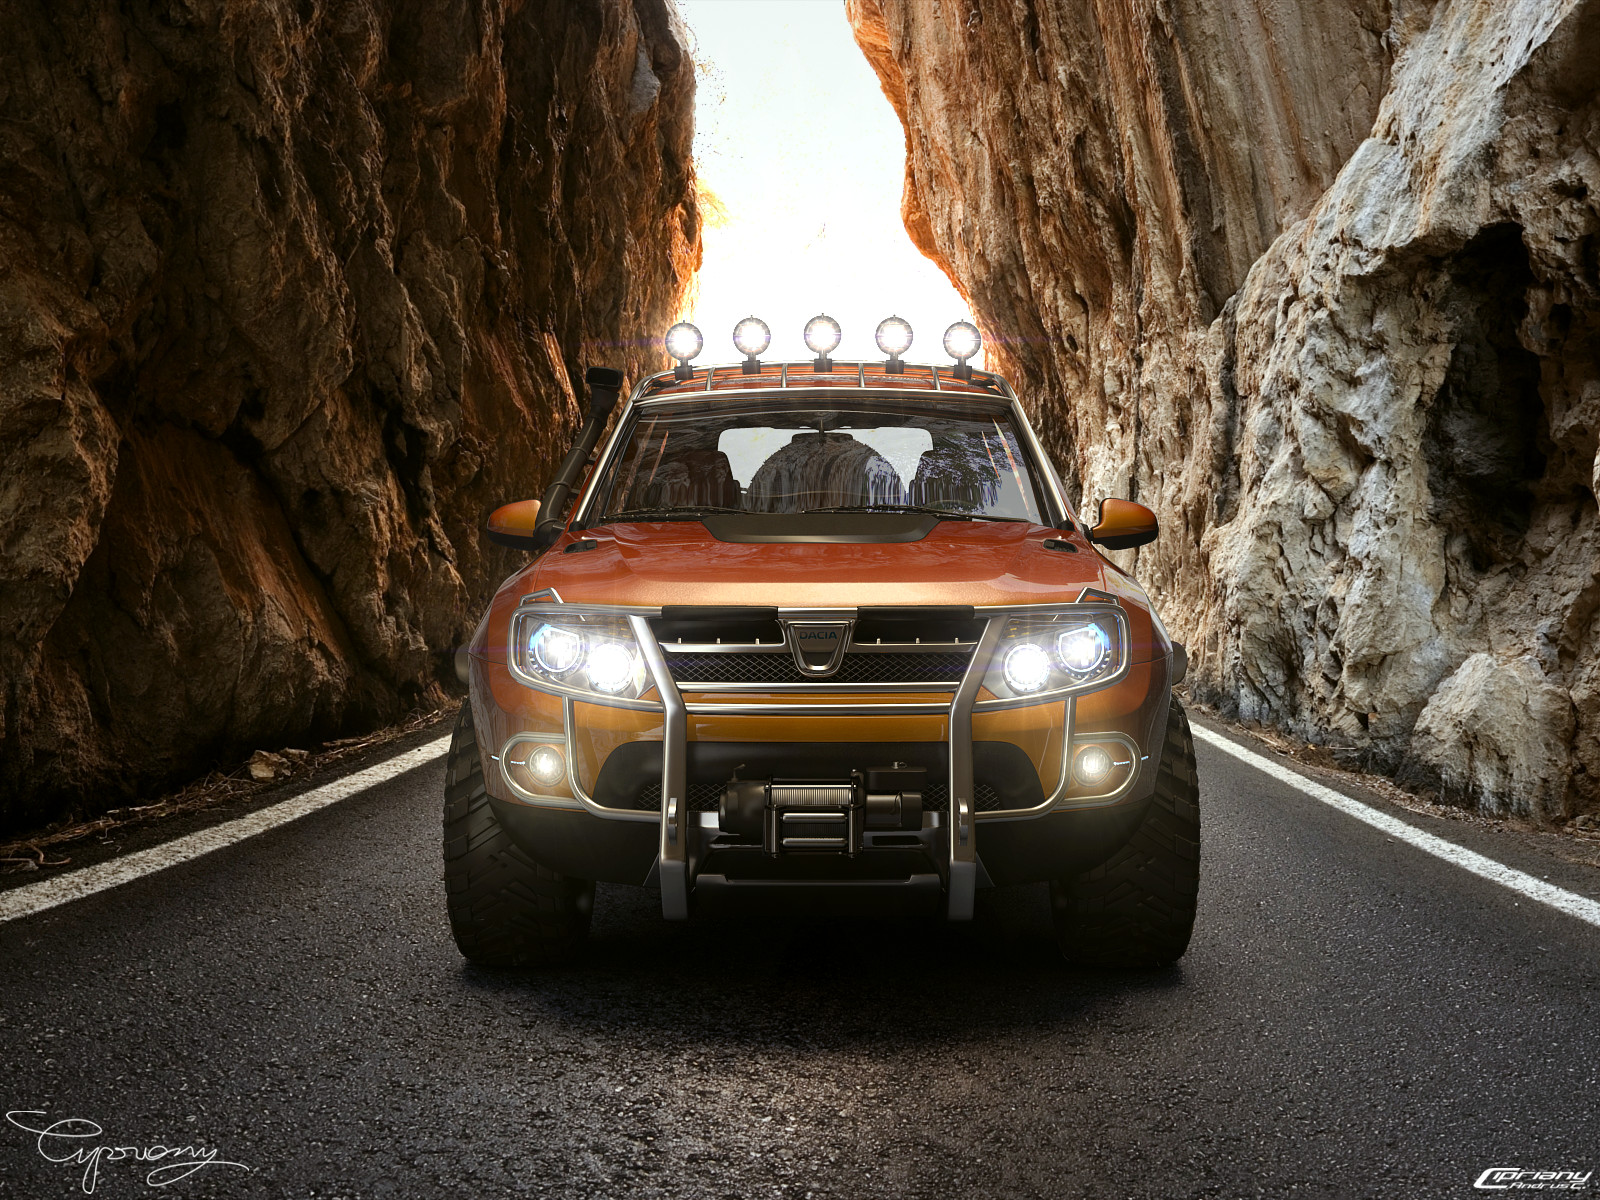 Dacia Duster Tuning 15 - Light by cipriany on DeviantArt